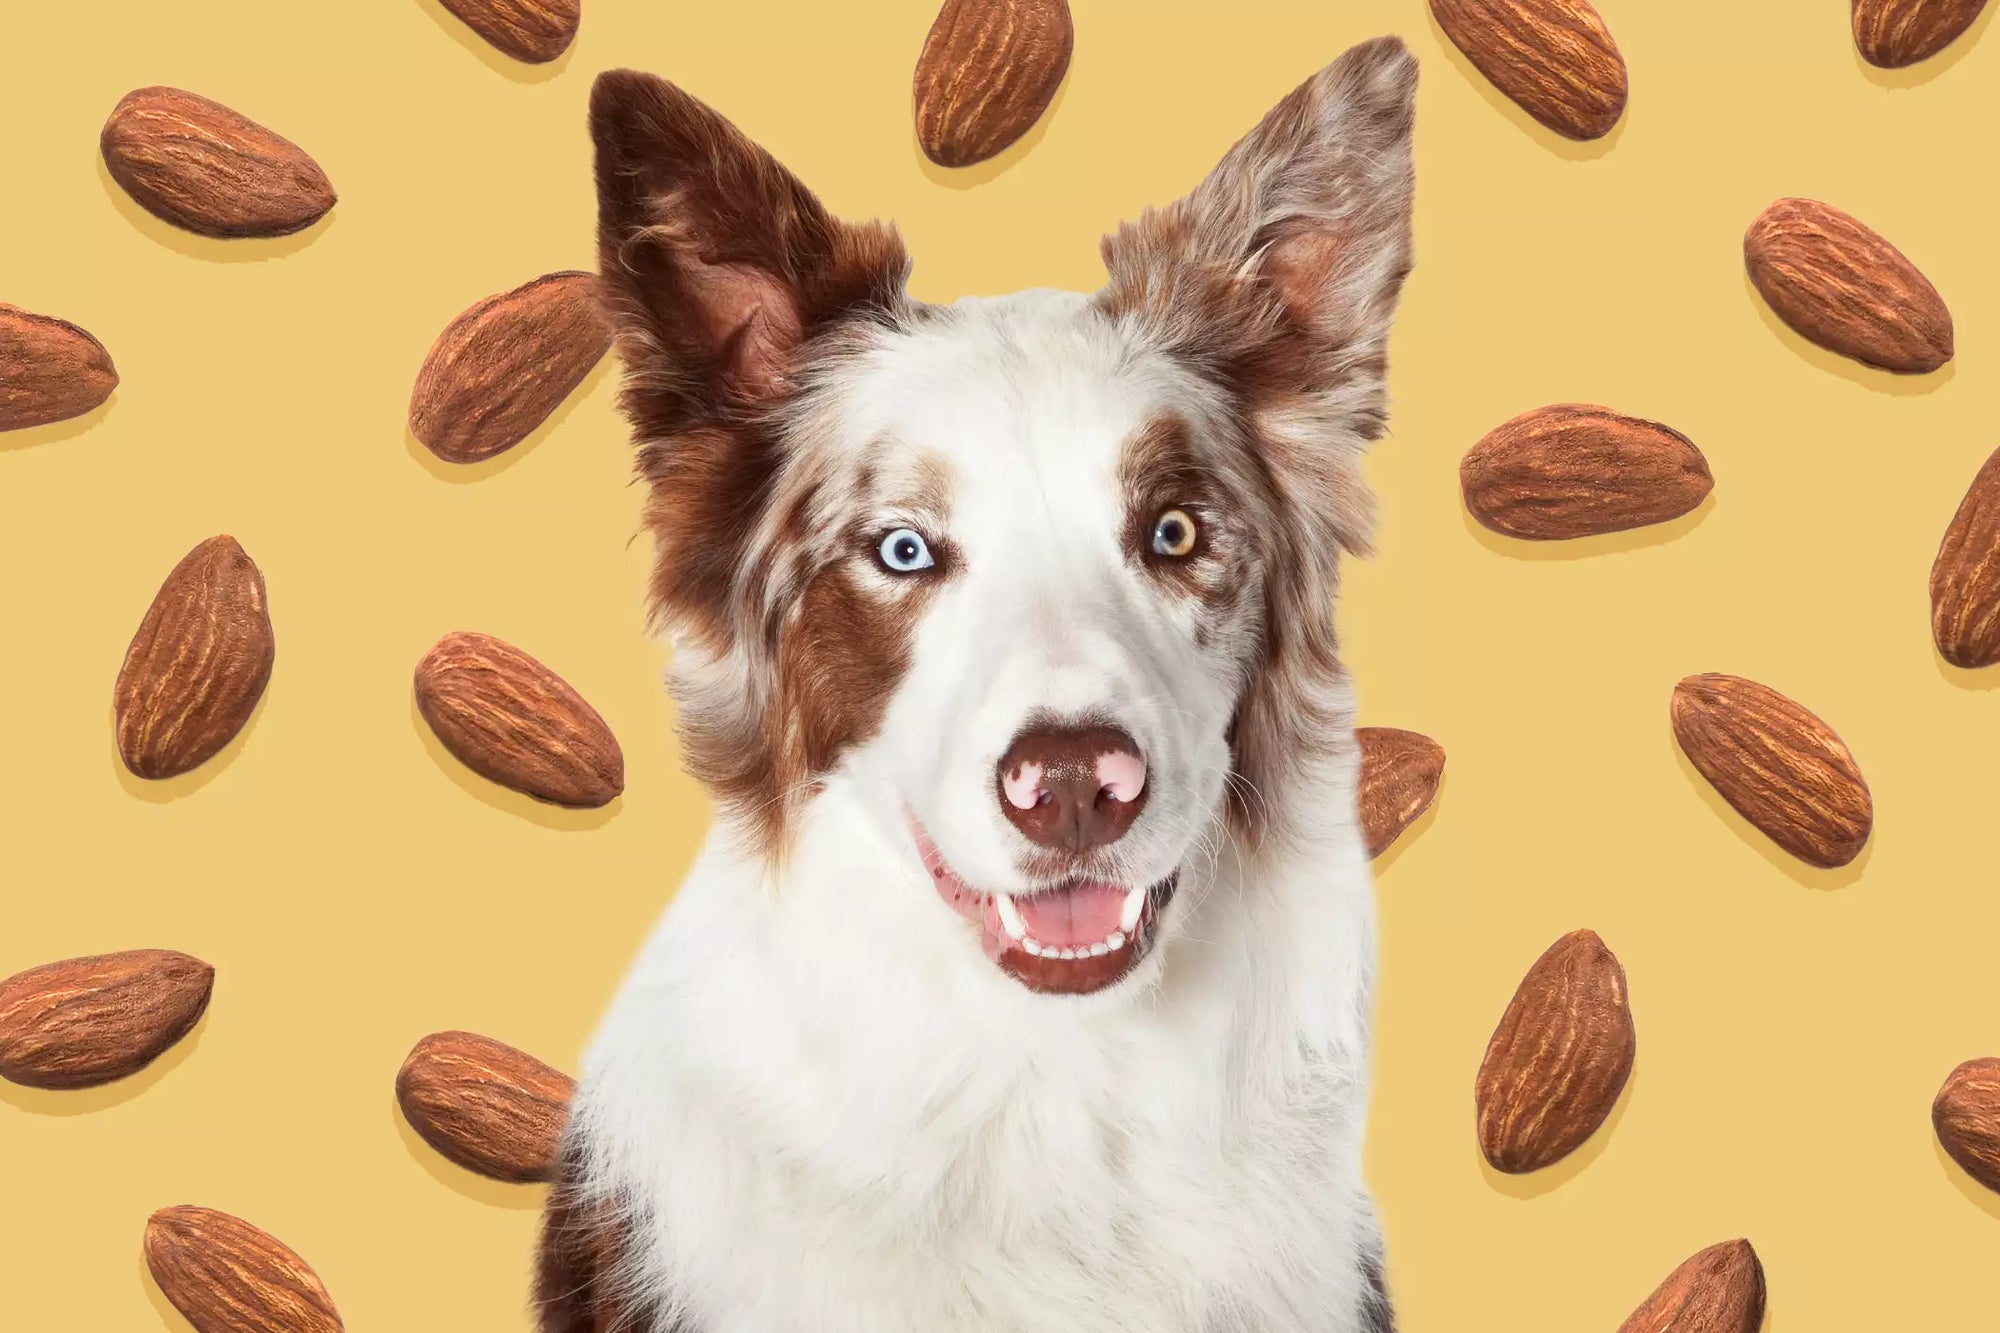 Can Dogs Eat Almonds?